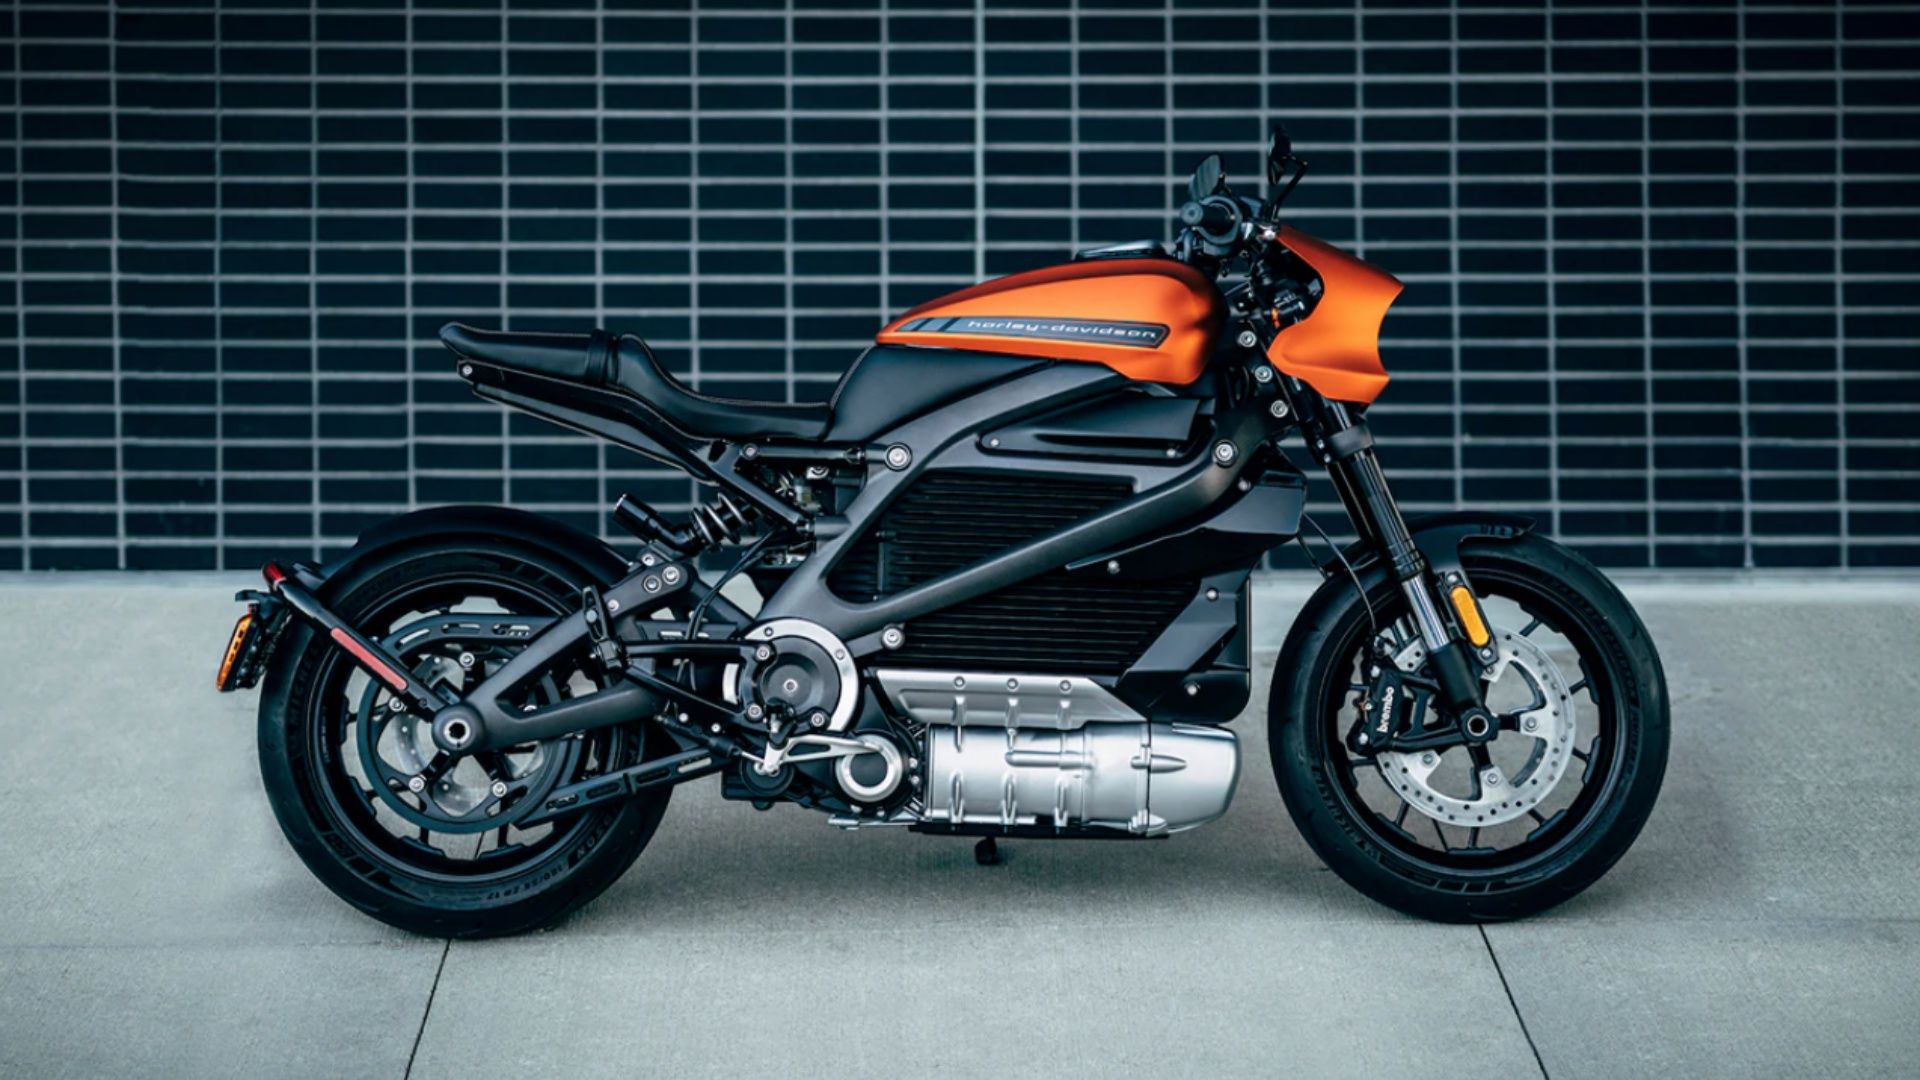 Harley-Davidson Livewire One Electric motorcycle